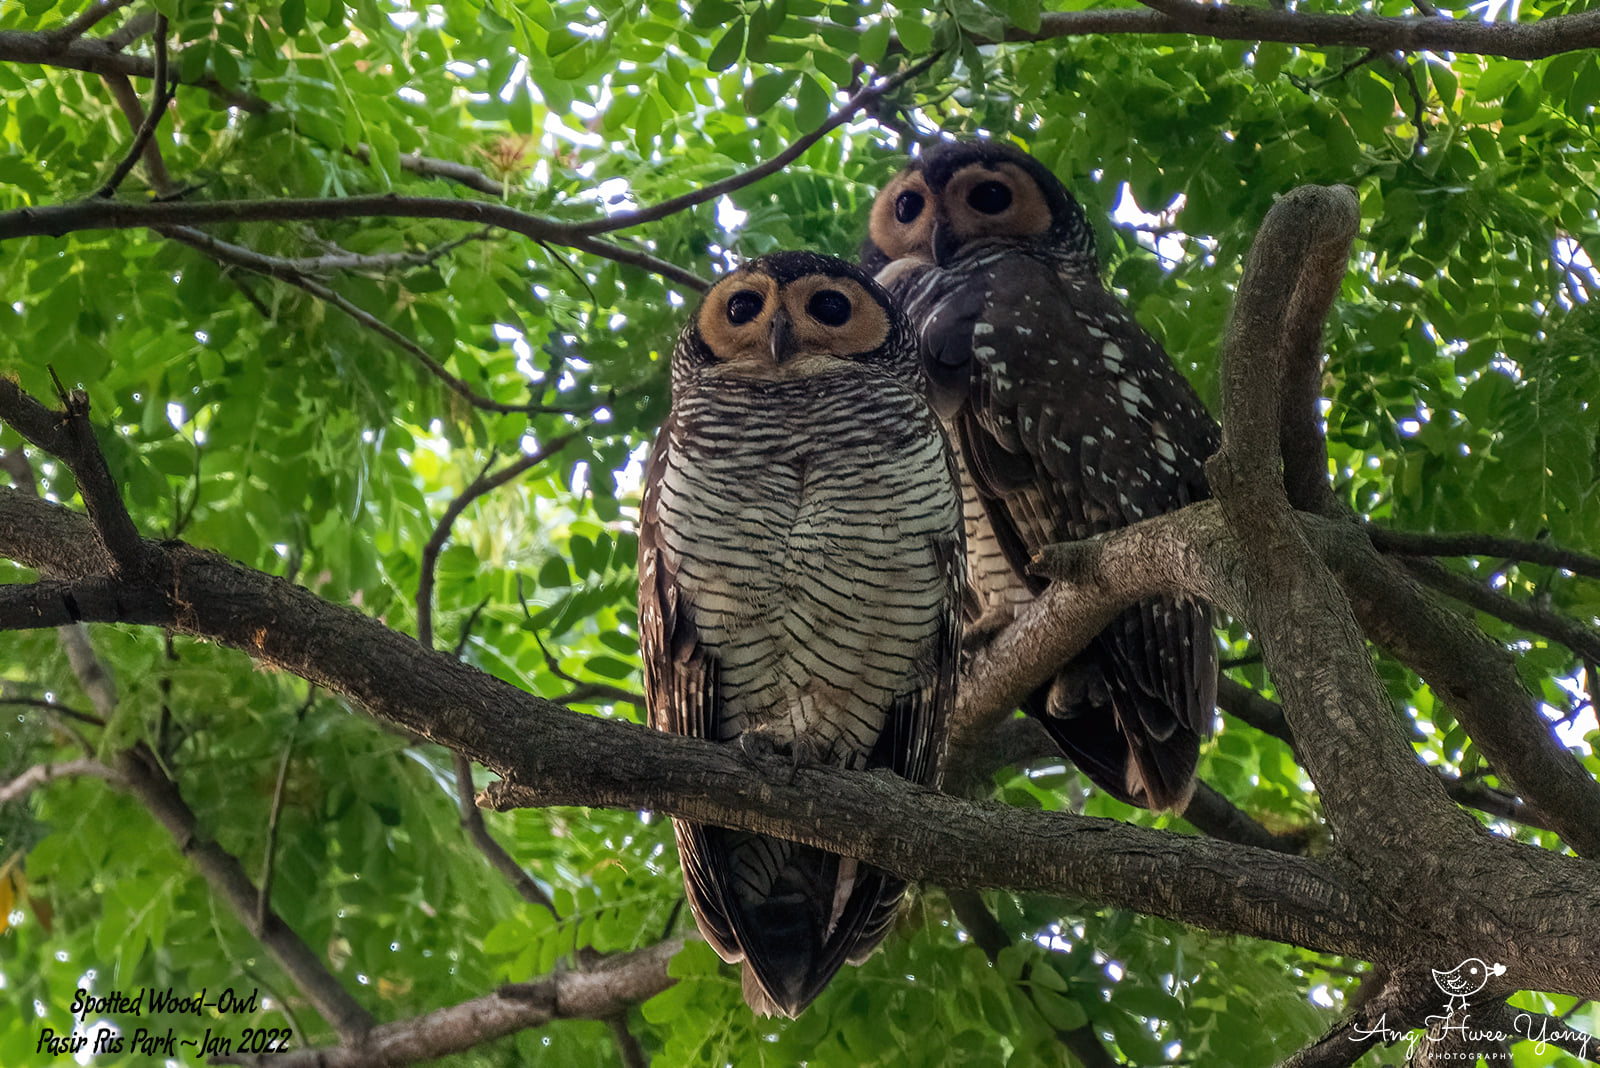 Mothership on X: "Spotted Wood Owl couple in Pasir Ris Park are proud  parents of 2 baby owlets https://t.co/WcCQxjZ03K https://t.co/xX9P9M2K9J" /  X